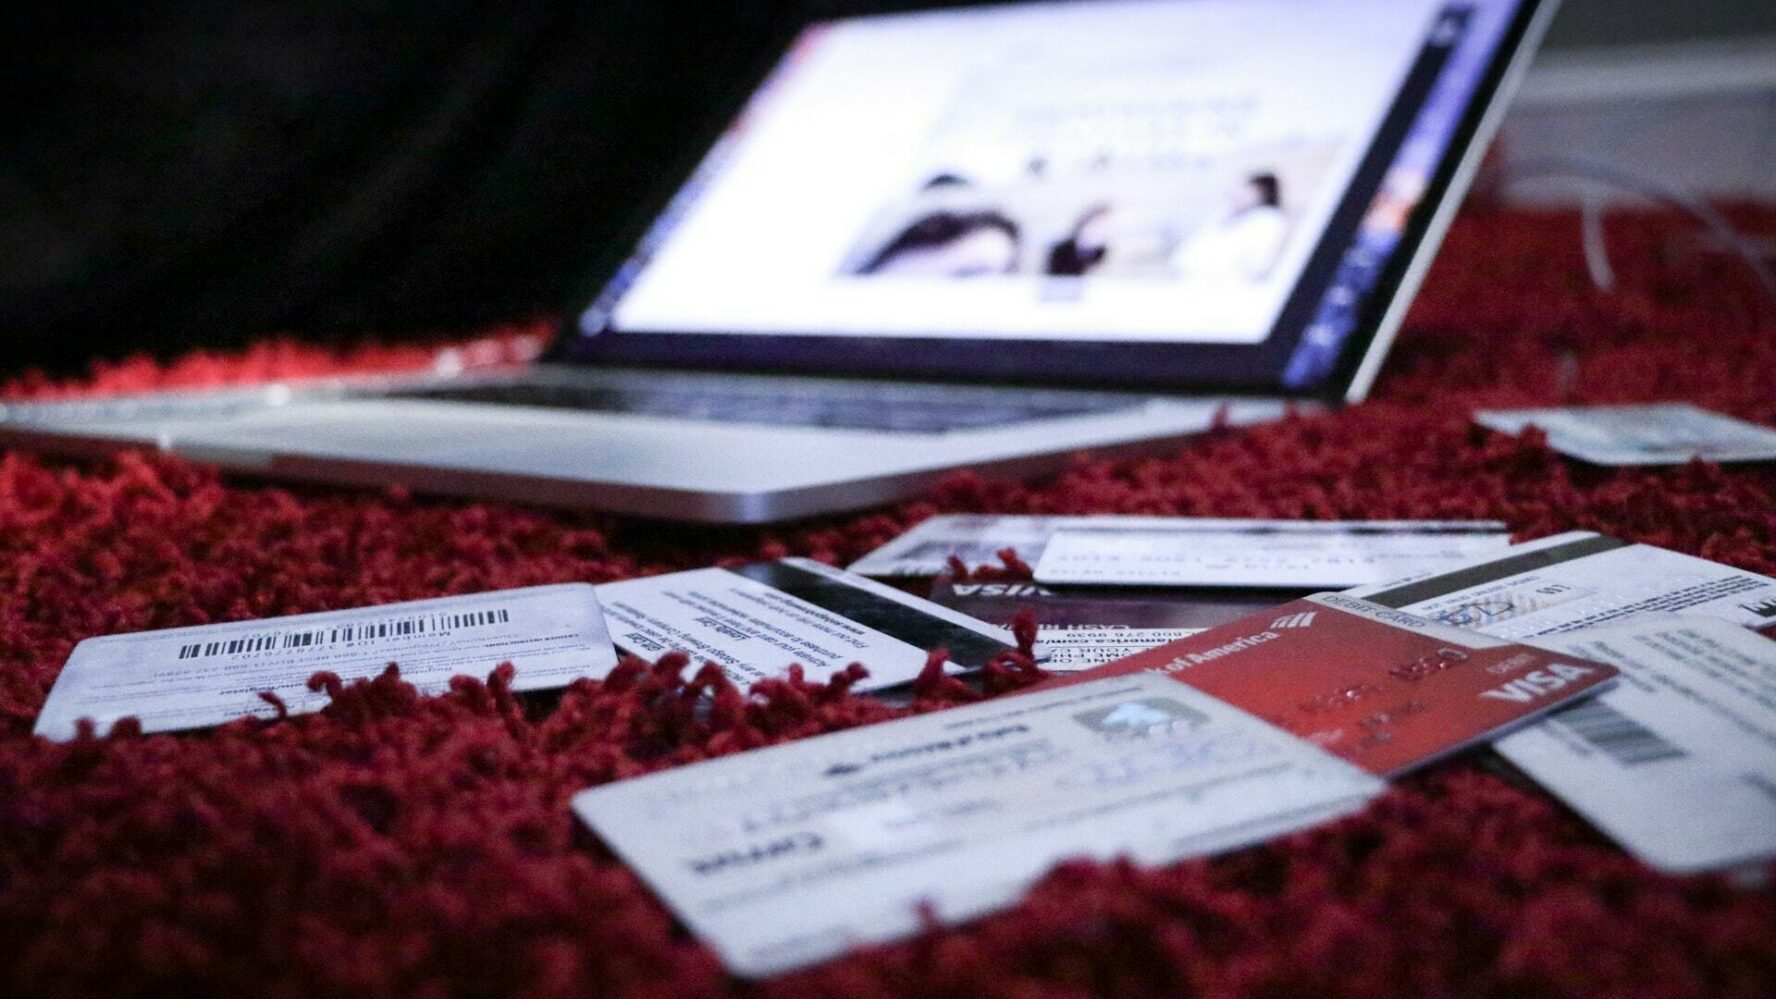 Scattered credit cards and an open laptop